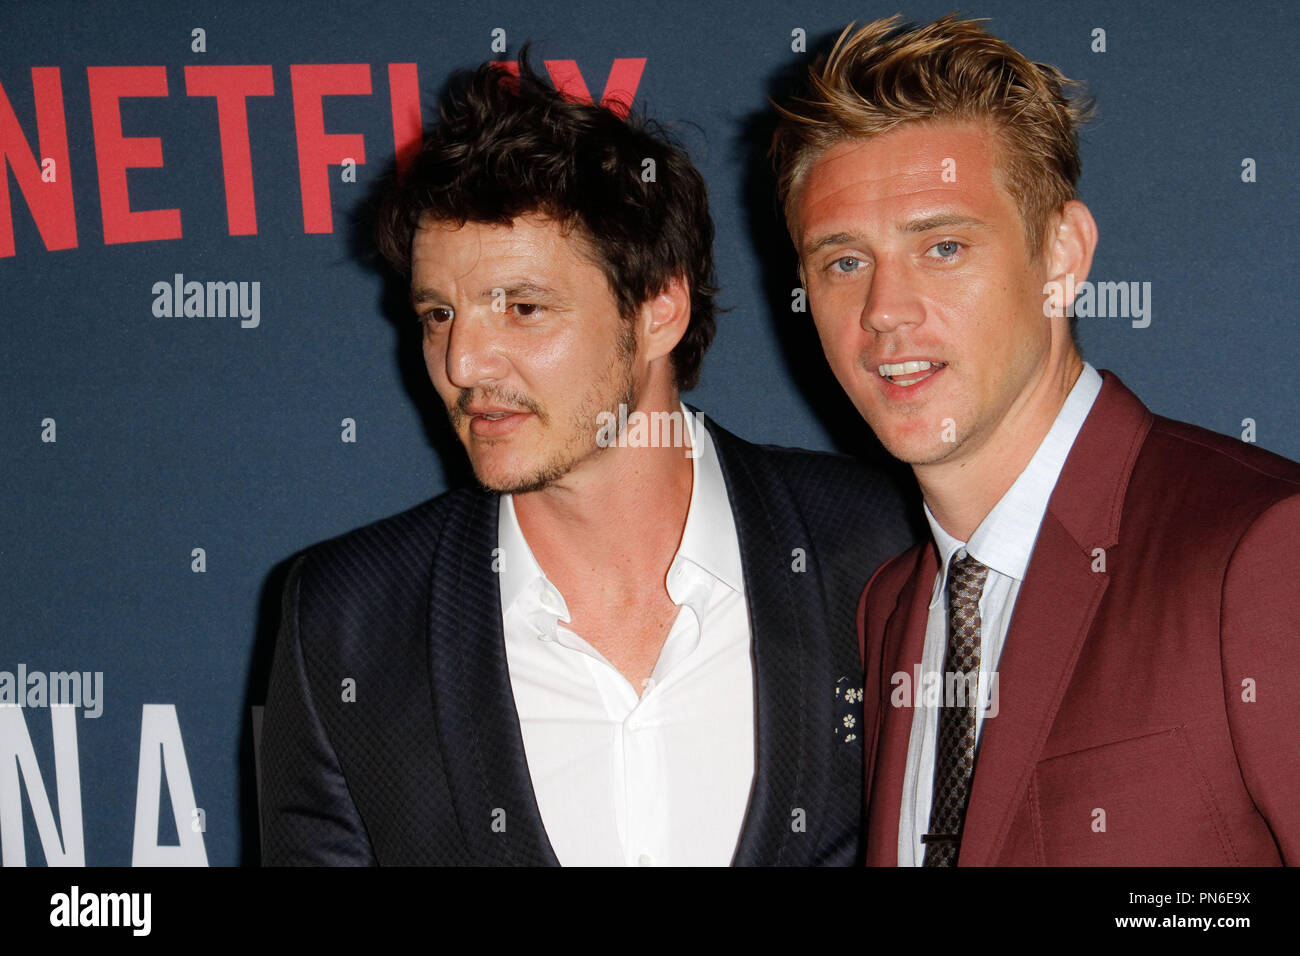 Pedro Pascal and Boyd Holbrook at the Premiere of Netflix's 'Narcos' Season 2 Premiere held at Arclight Hollywood in Hollywood, CA, August 24, 2016. Photo by Joe Martinez / PictureLux Stock Photo